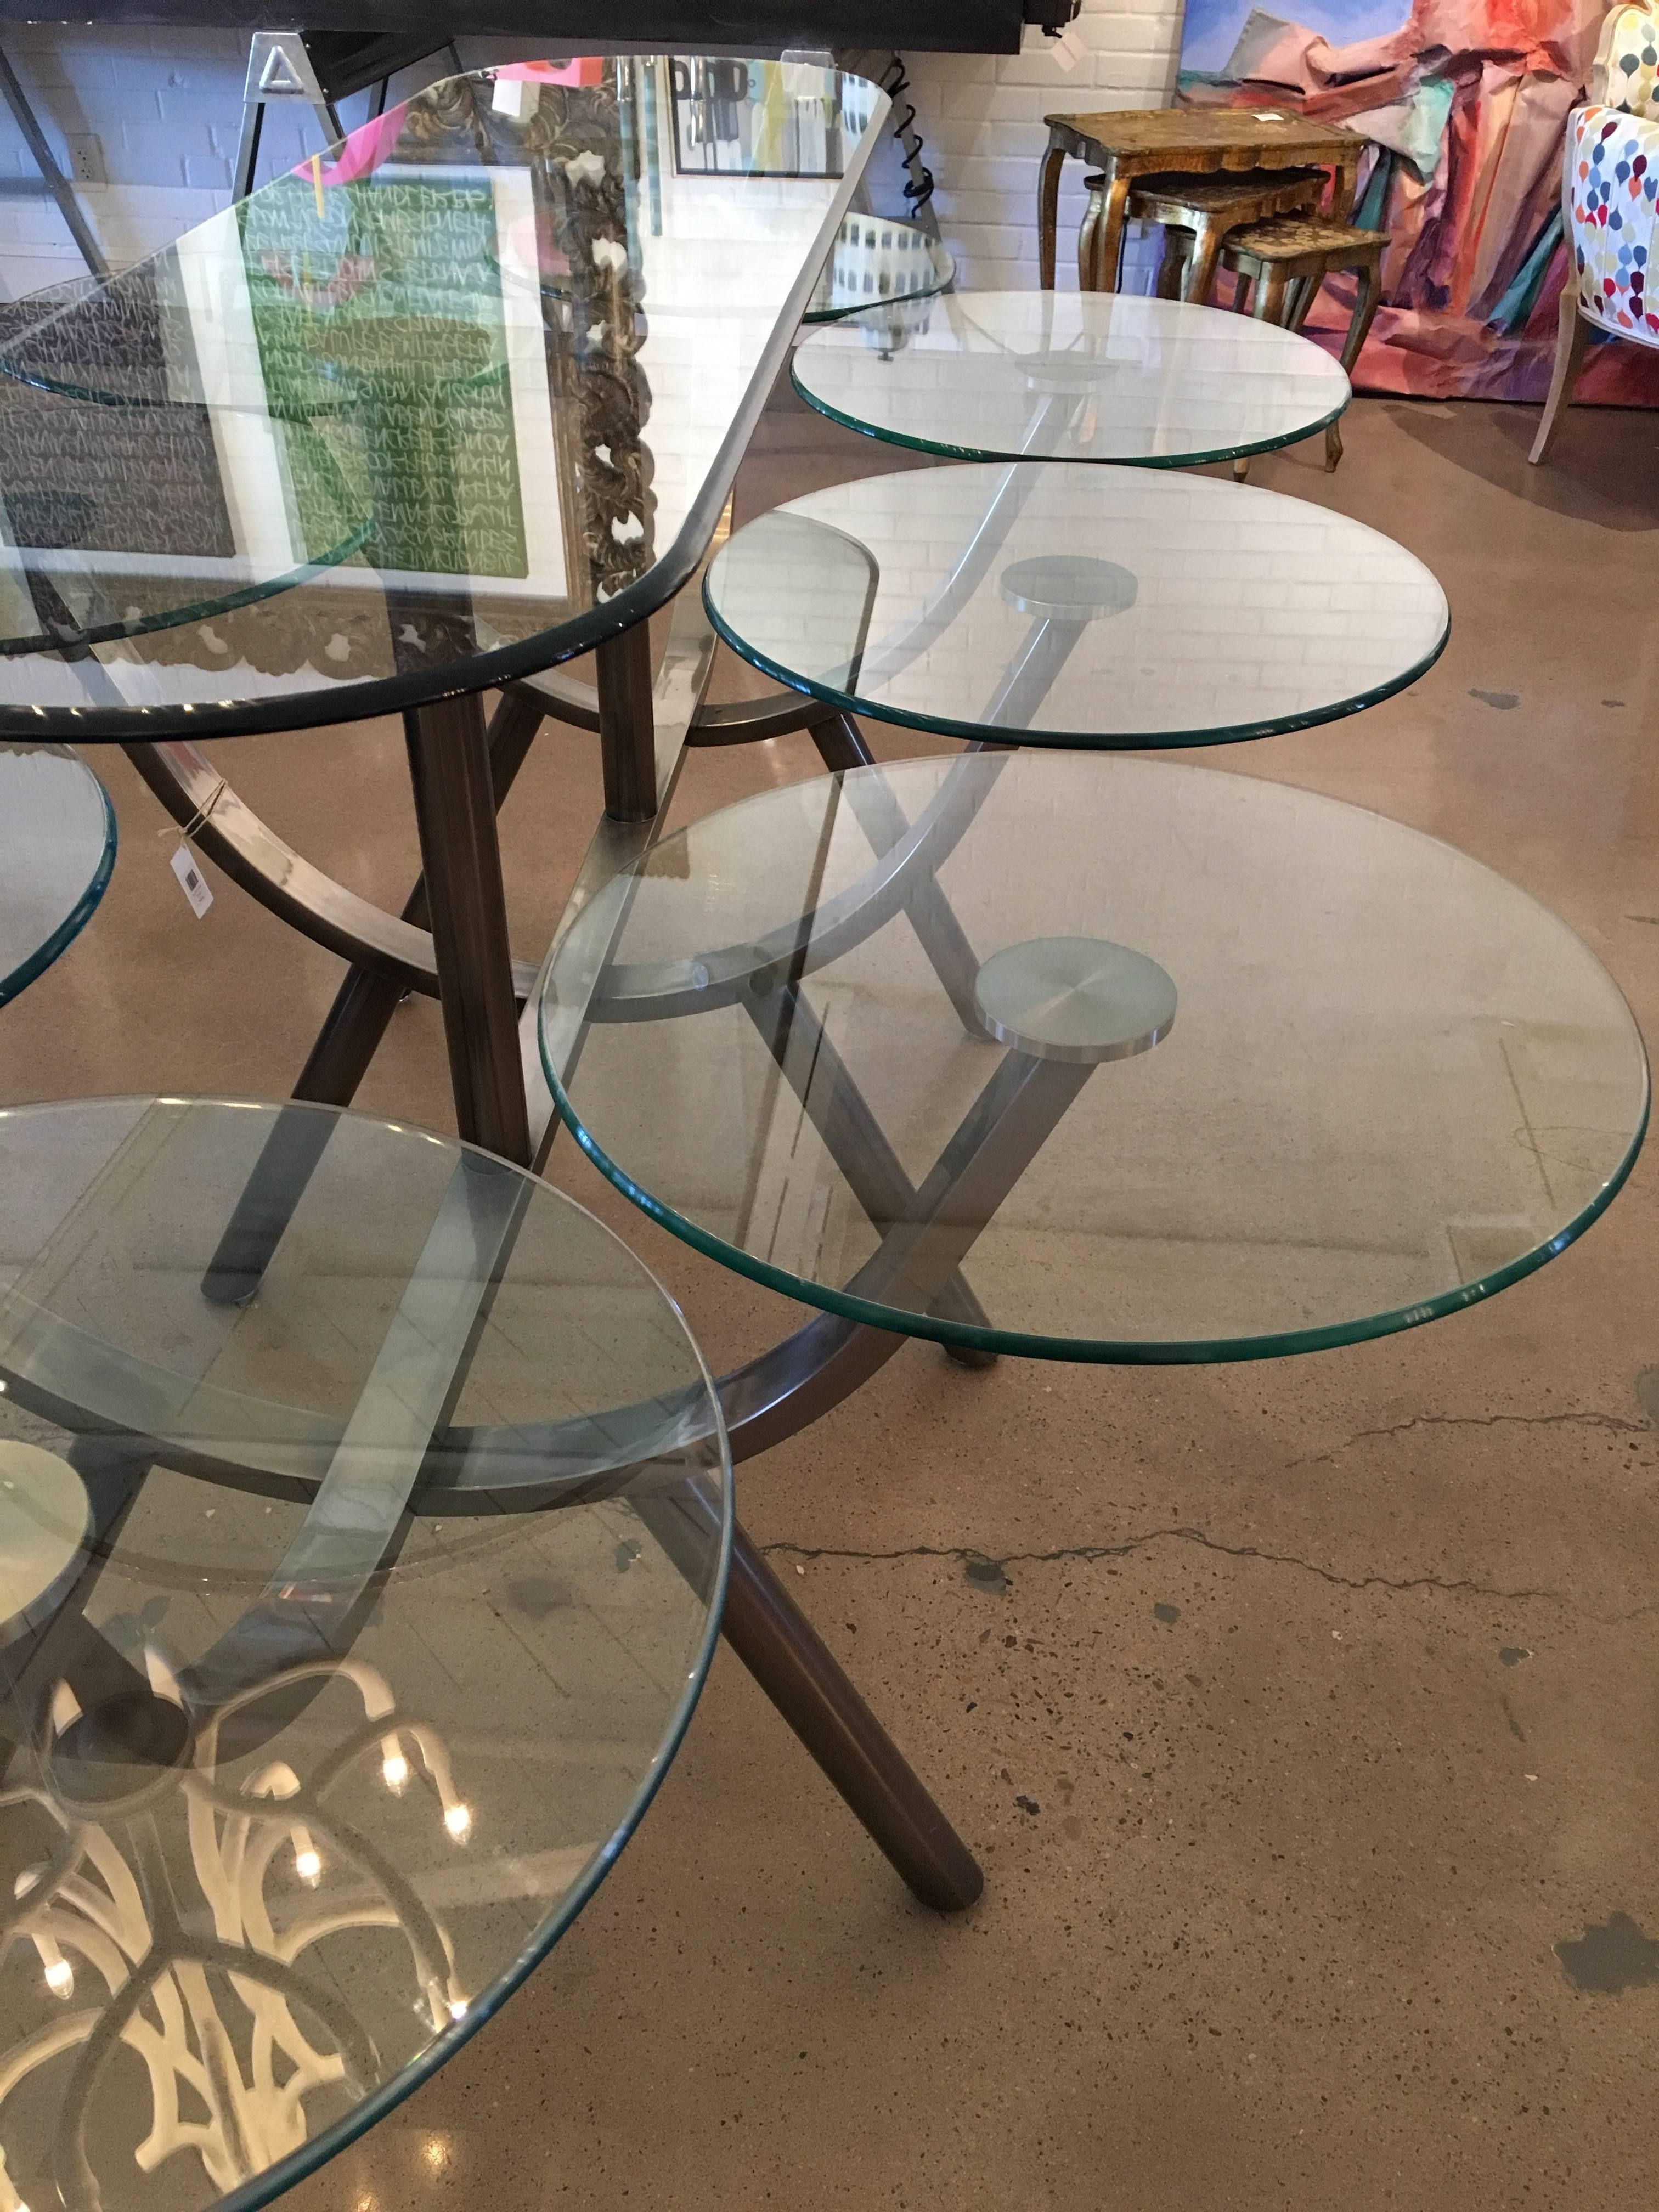 This iconic and amazingly unique dining table is offered here. With a circular place setting for each person, this truly is a dining experience!